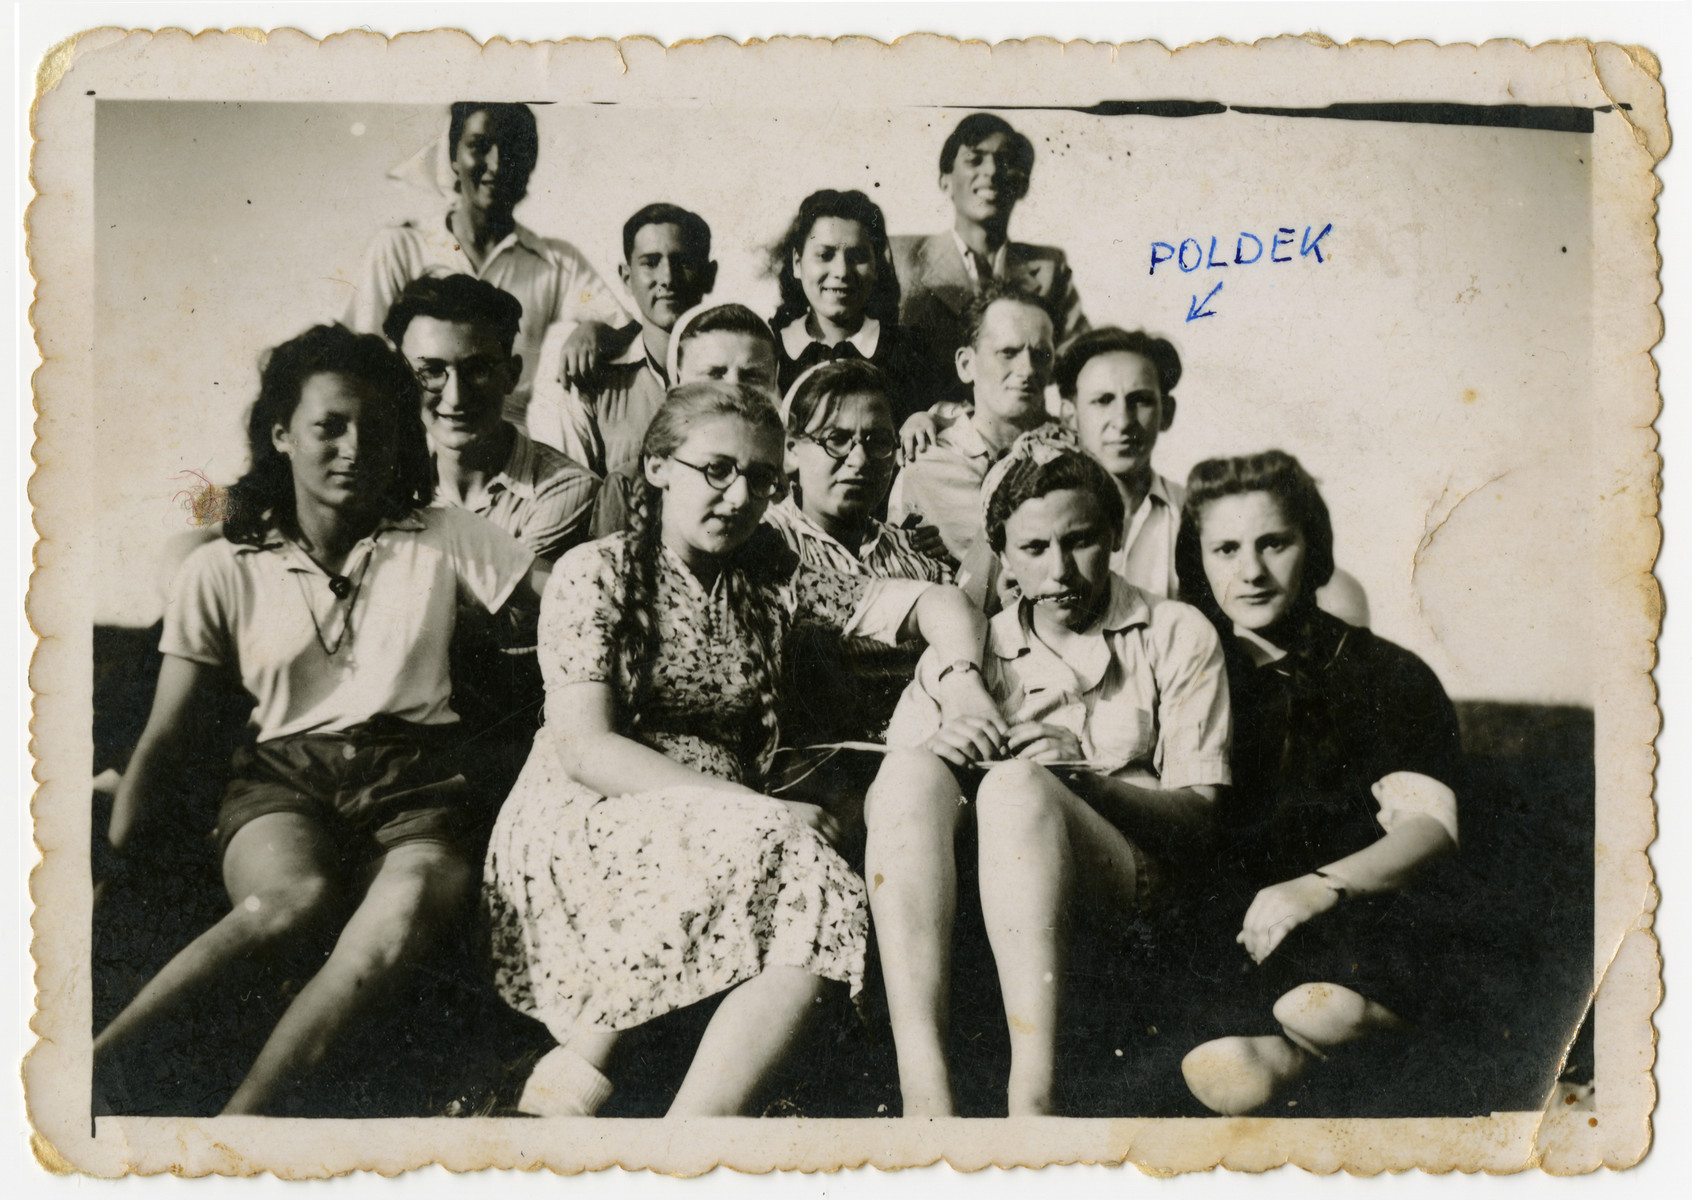 Group portrait of Zionist youth in "Farma."

The "Farma" was a plot of land between Bedzin and Sosnowiec that was allocated to the local Zionist youth movements by the Jewish Council for the growing of vegetables. The youth movements created a hachshara on the site. Soon after, the "Farma" became the center of resistance efforts, as well as youth activity, in the ghetto.